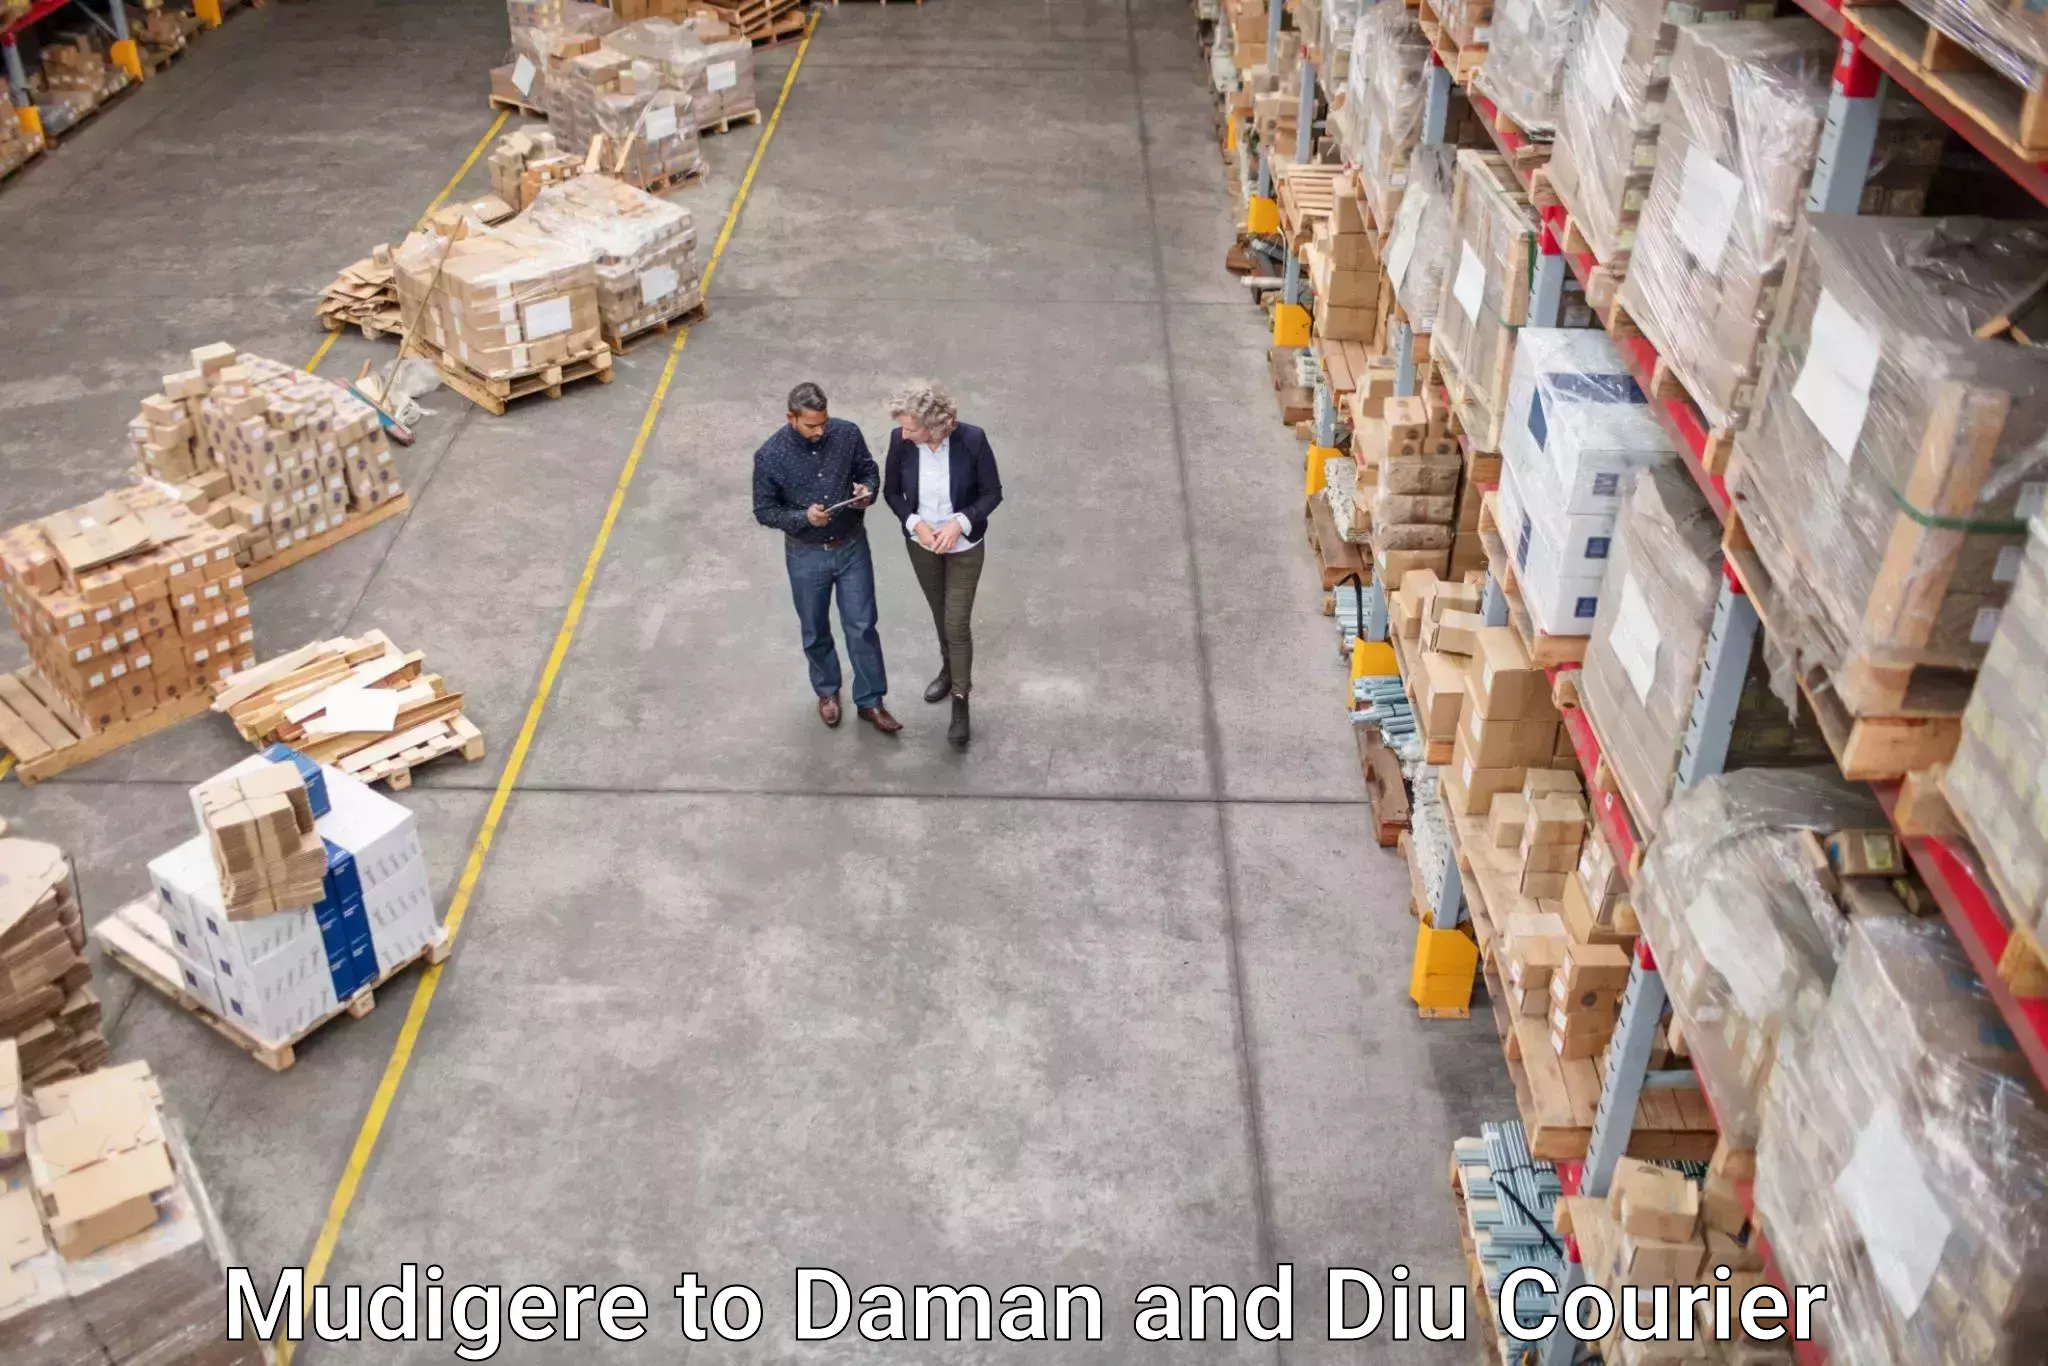 Efficient courier operations in Mudigere to Daman and Diu